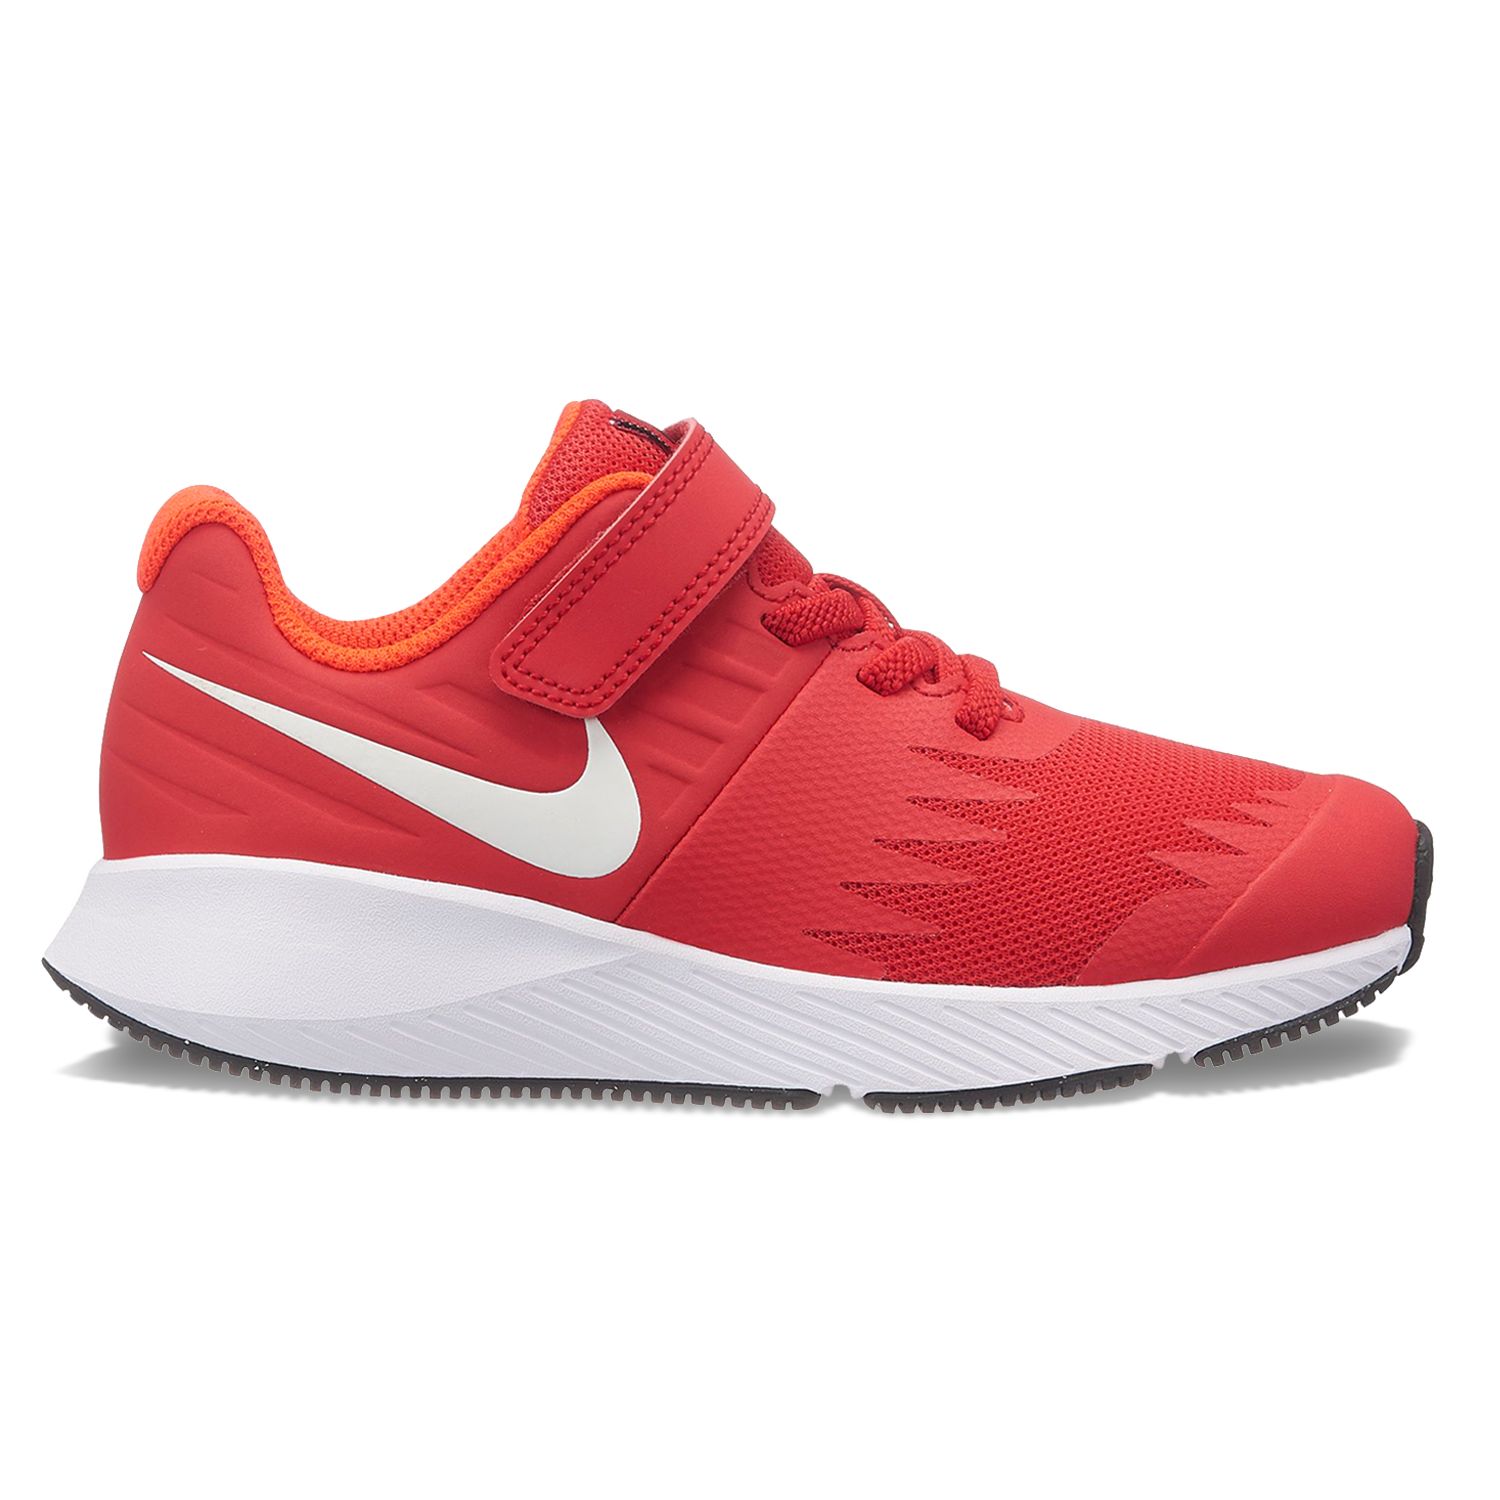 nike shoes for kids red